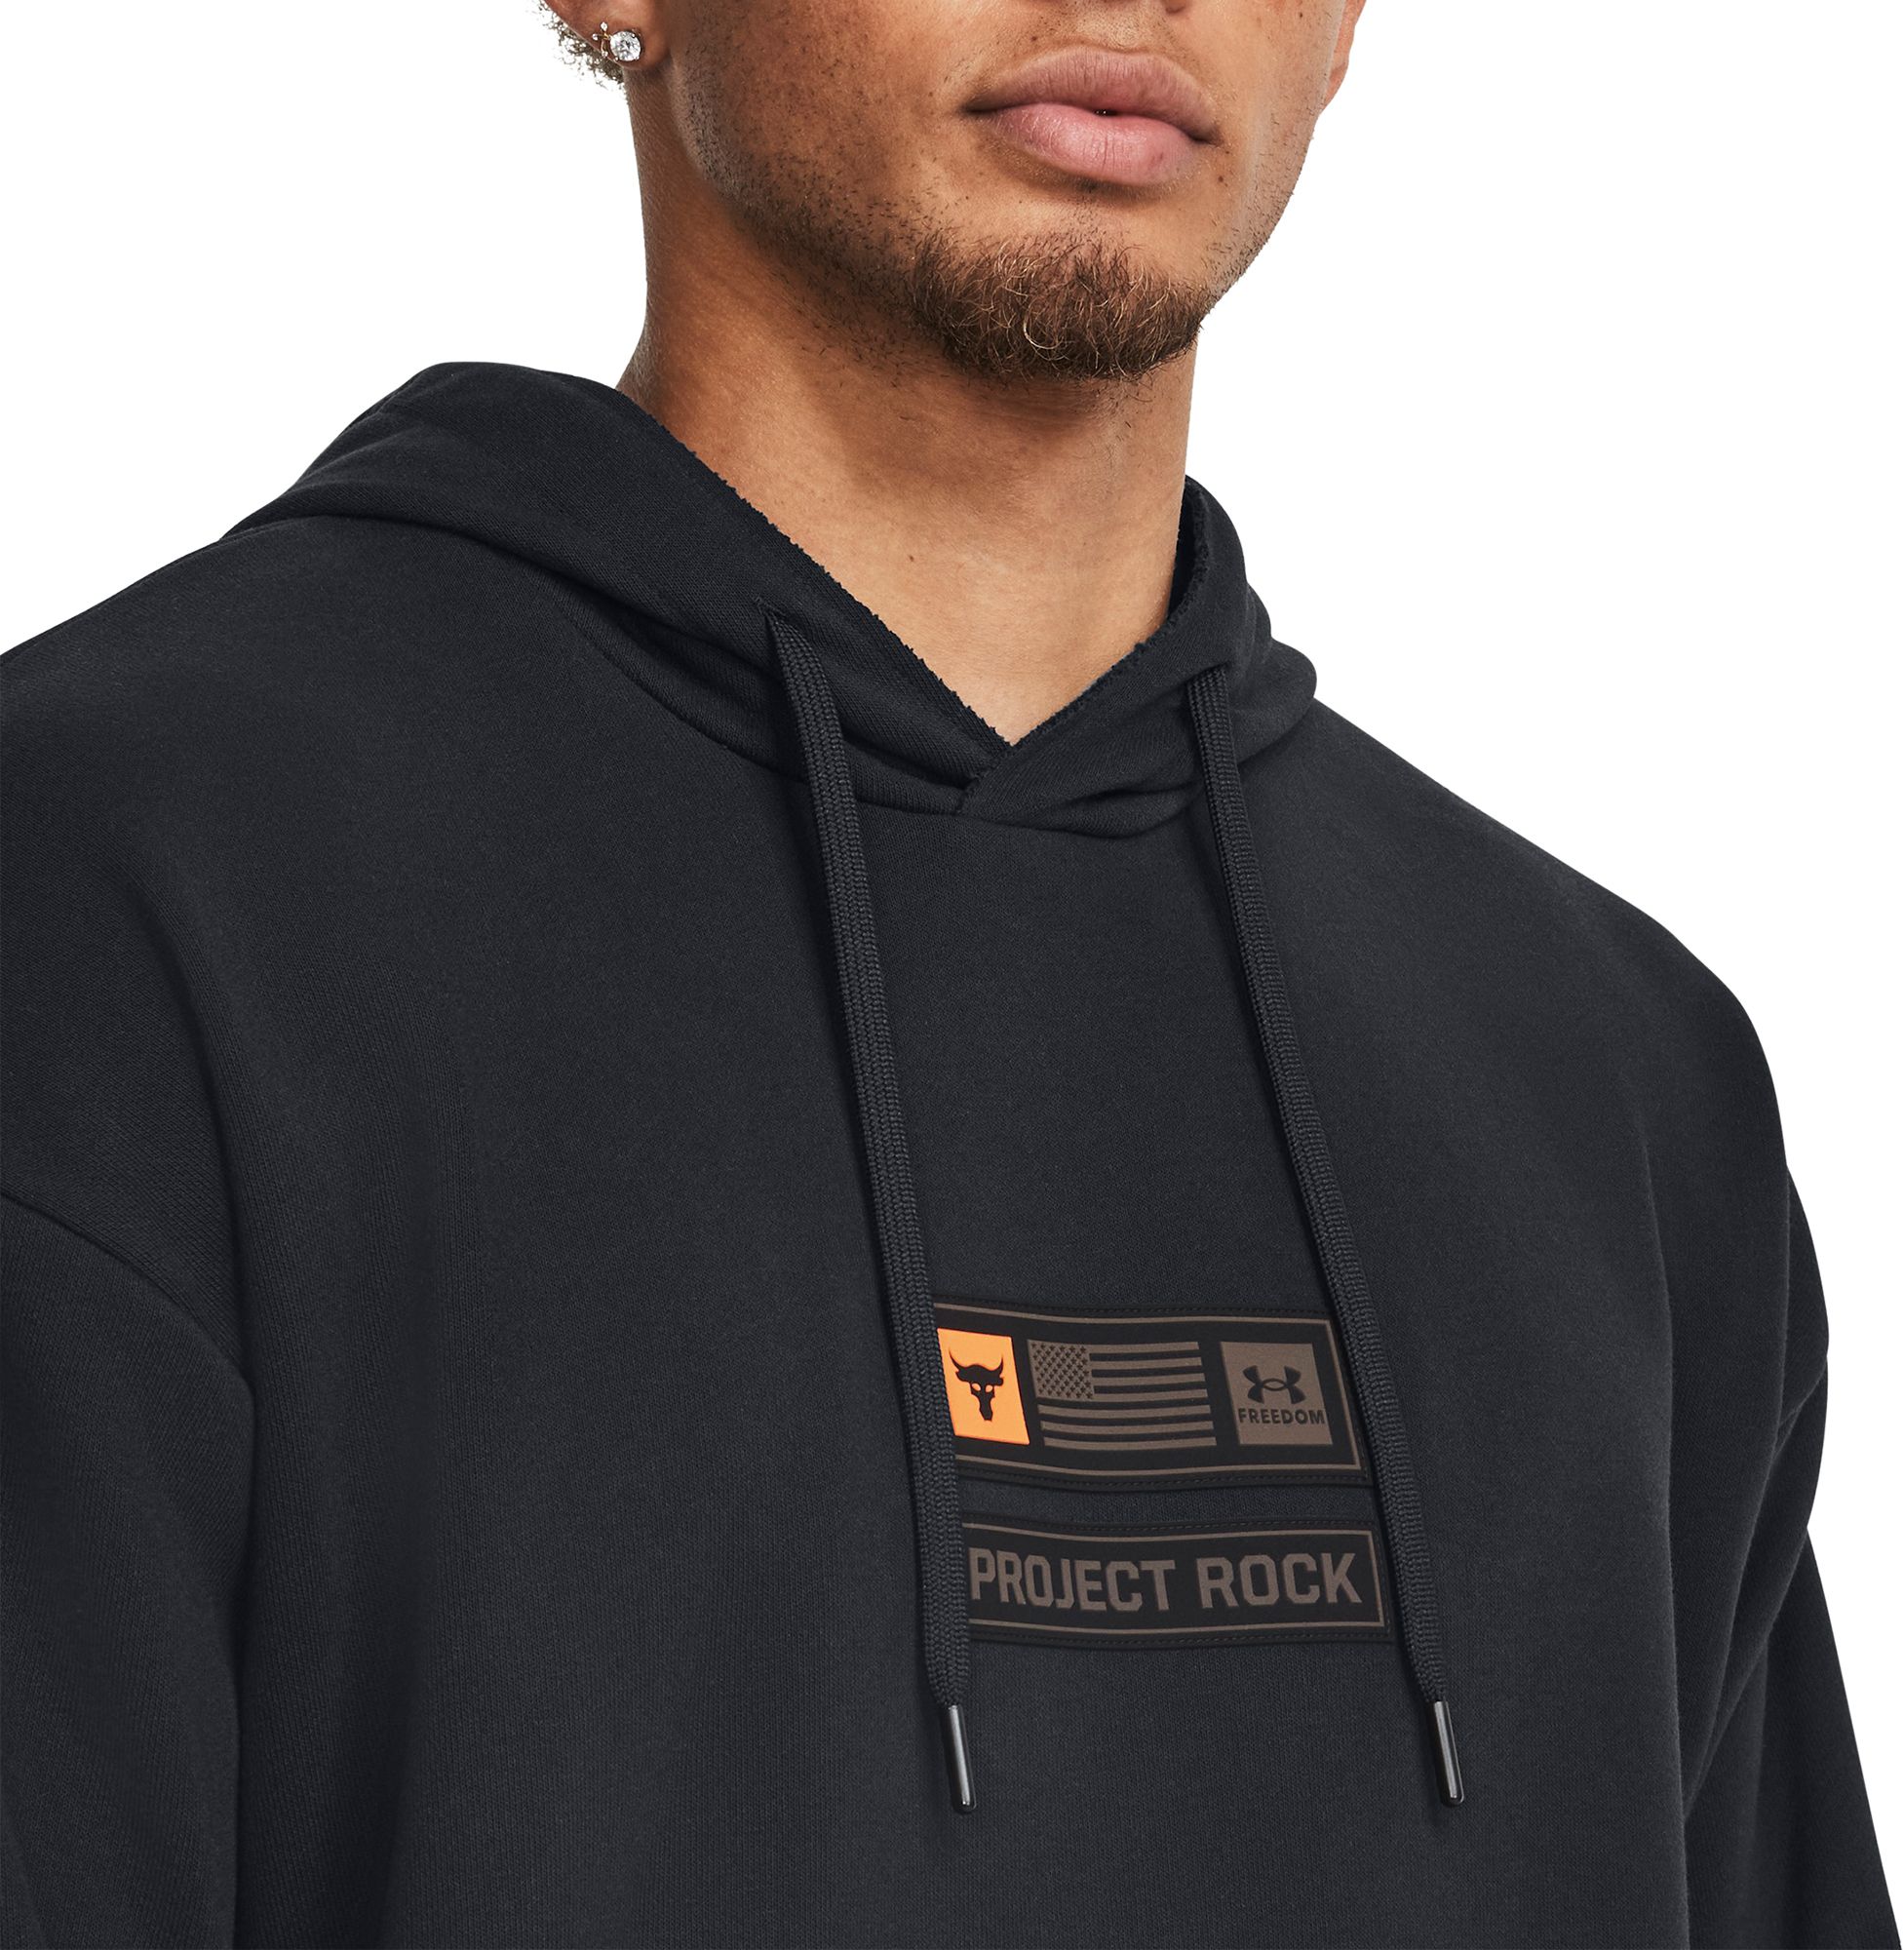 Dick's Sporting Goods Under Armour Men's Project Rock Heavyweight Terry  Hoodie